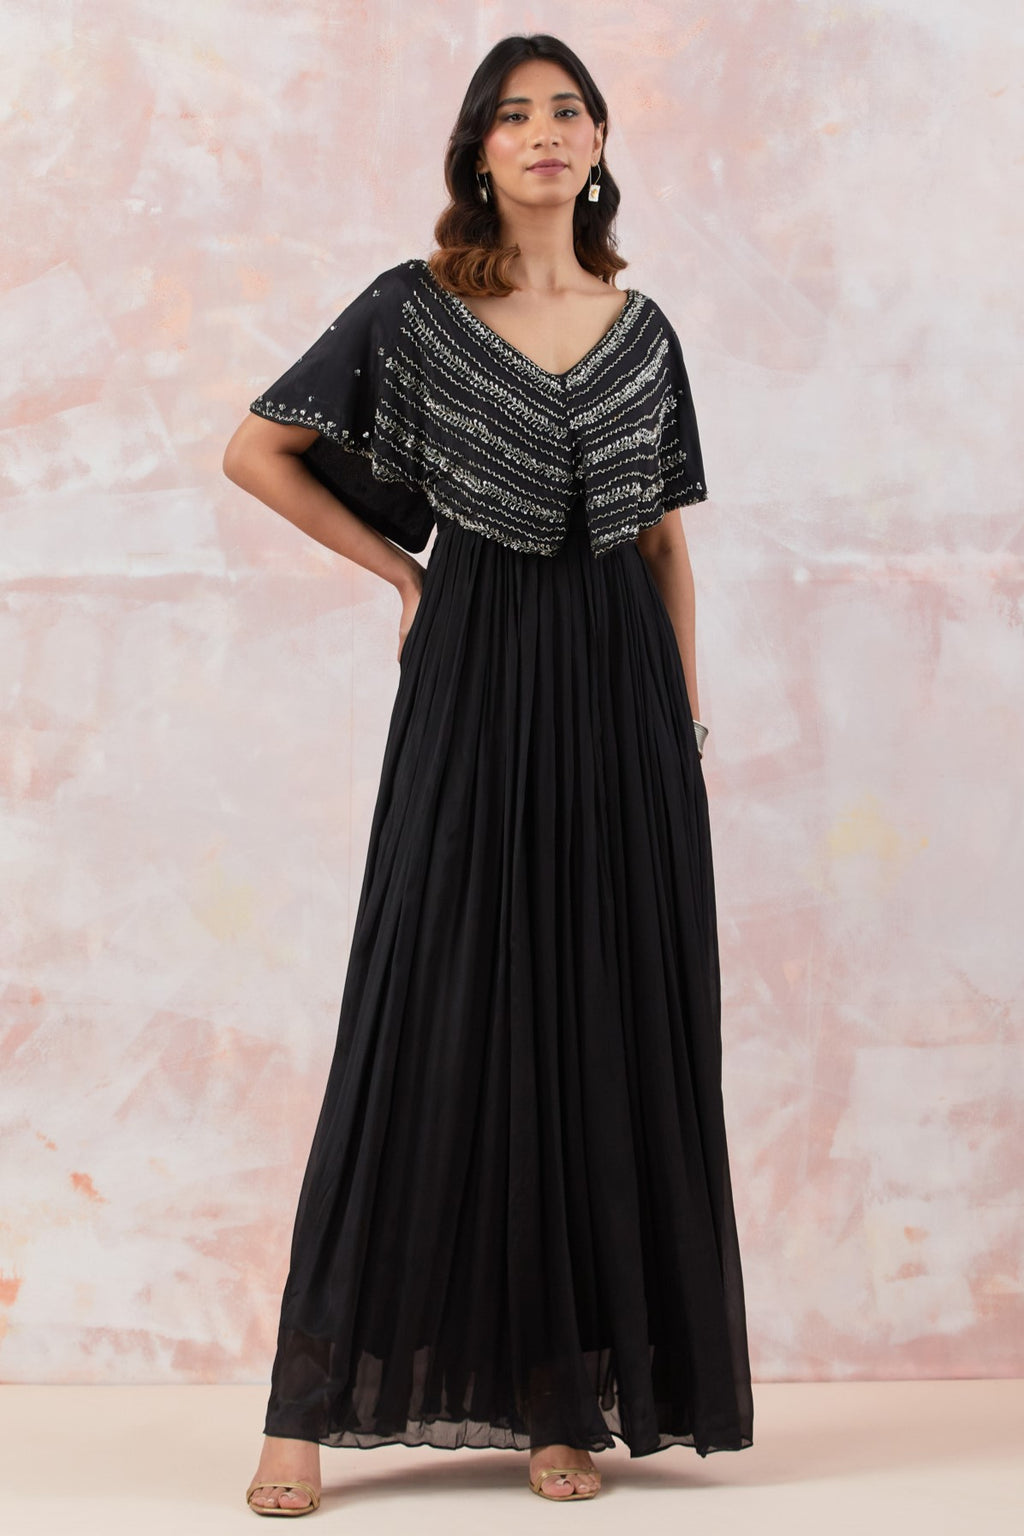 Buy Black caped gown featuring intricate handwork and immaculate detailing. It is best suited for occasions & parties. Dazzle on weddings and special occasions with exquisite Indian designer dresses, sharara suits, Anarkali suits, and wedding lehengas from Pure Elegance Indian fashion store in the USA.